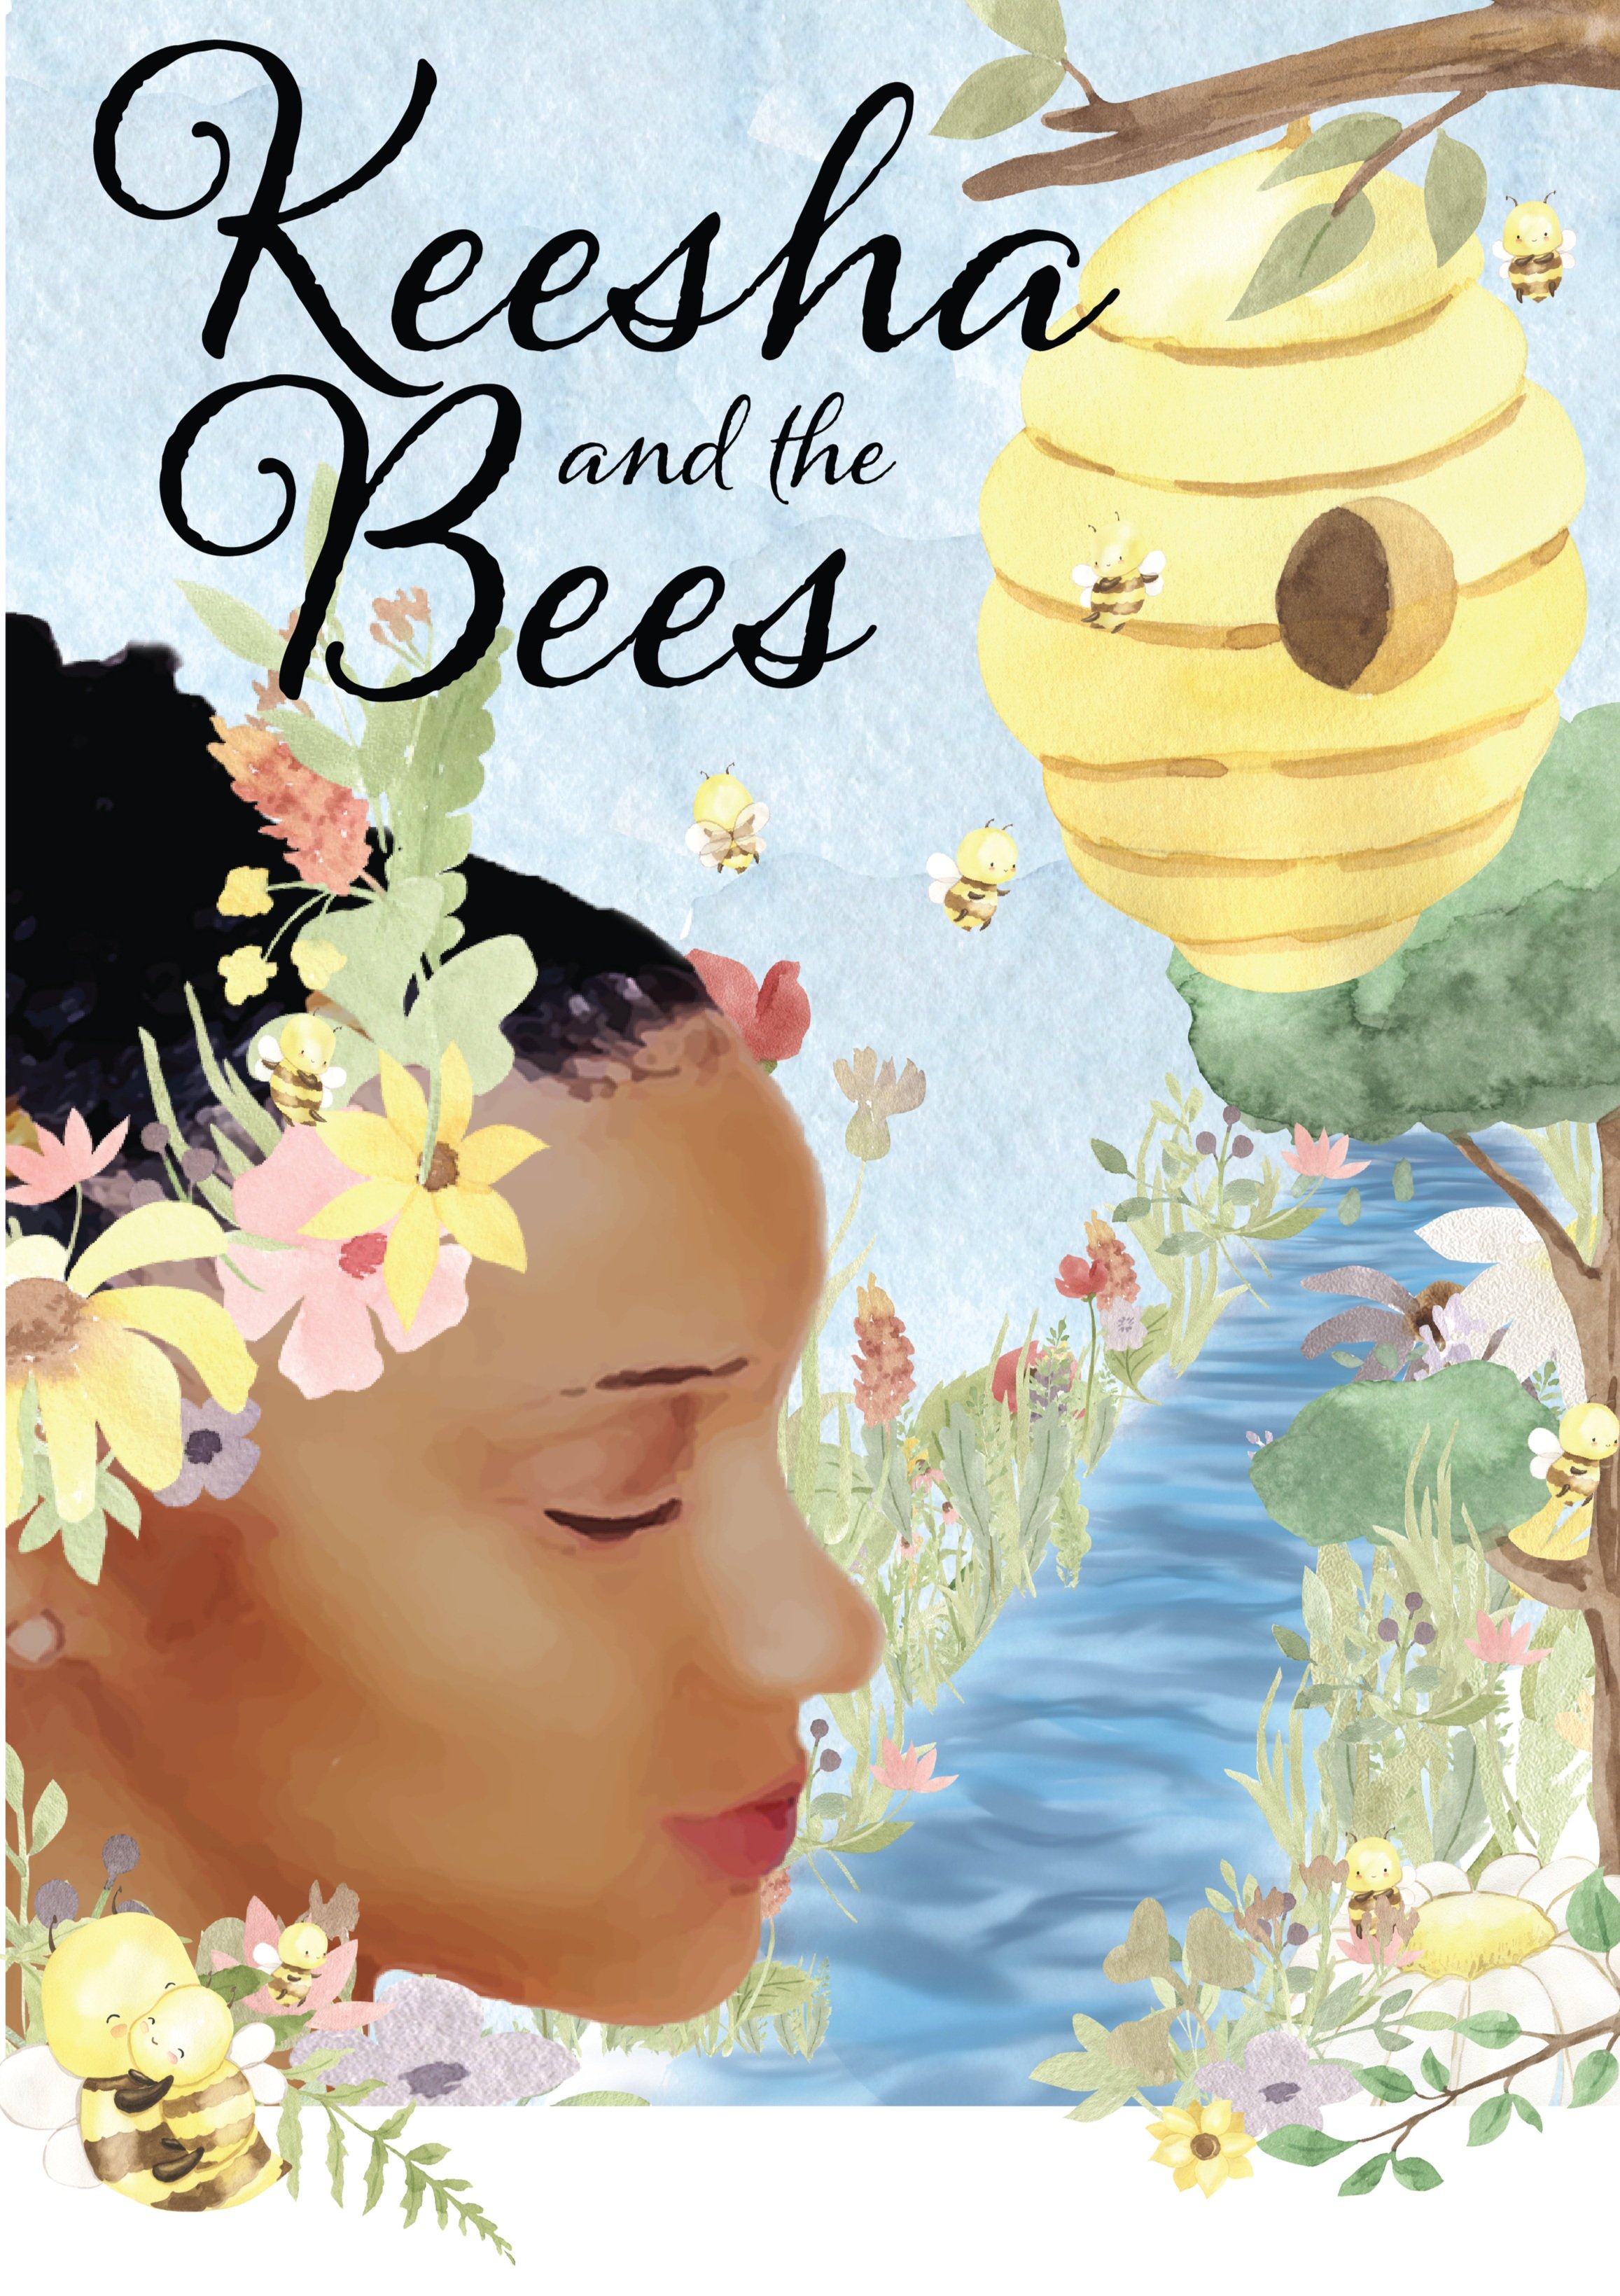 Keesha+and+the+Bees+Poster+11x17-01.jpg